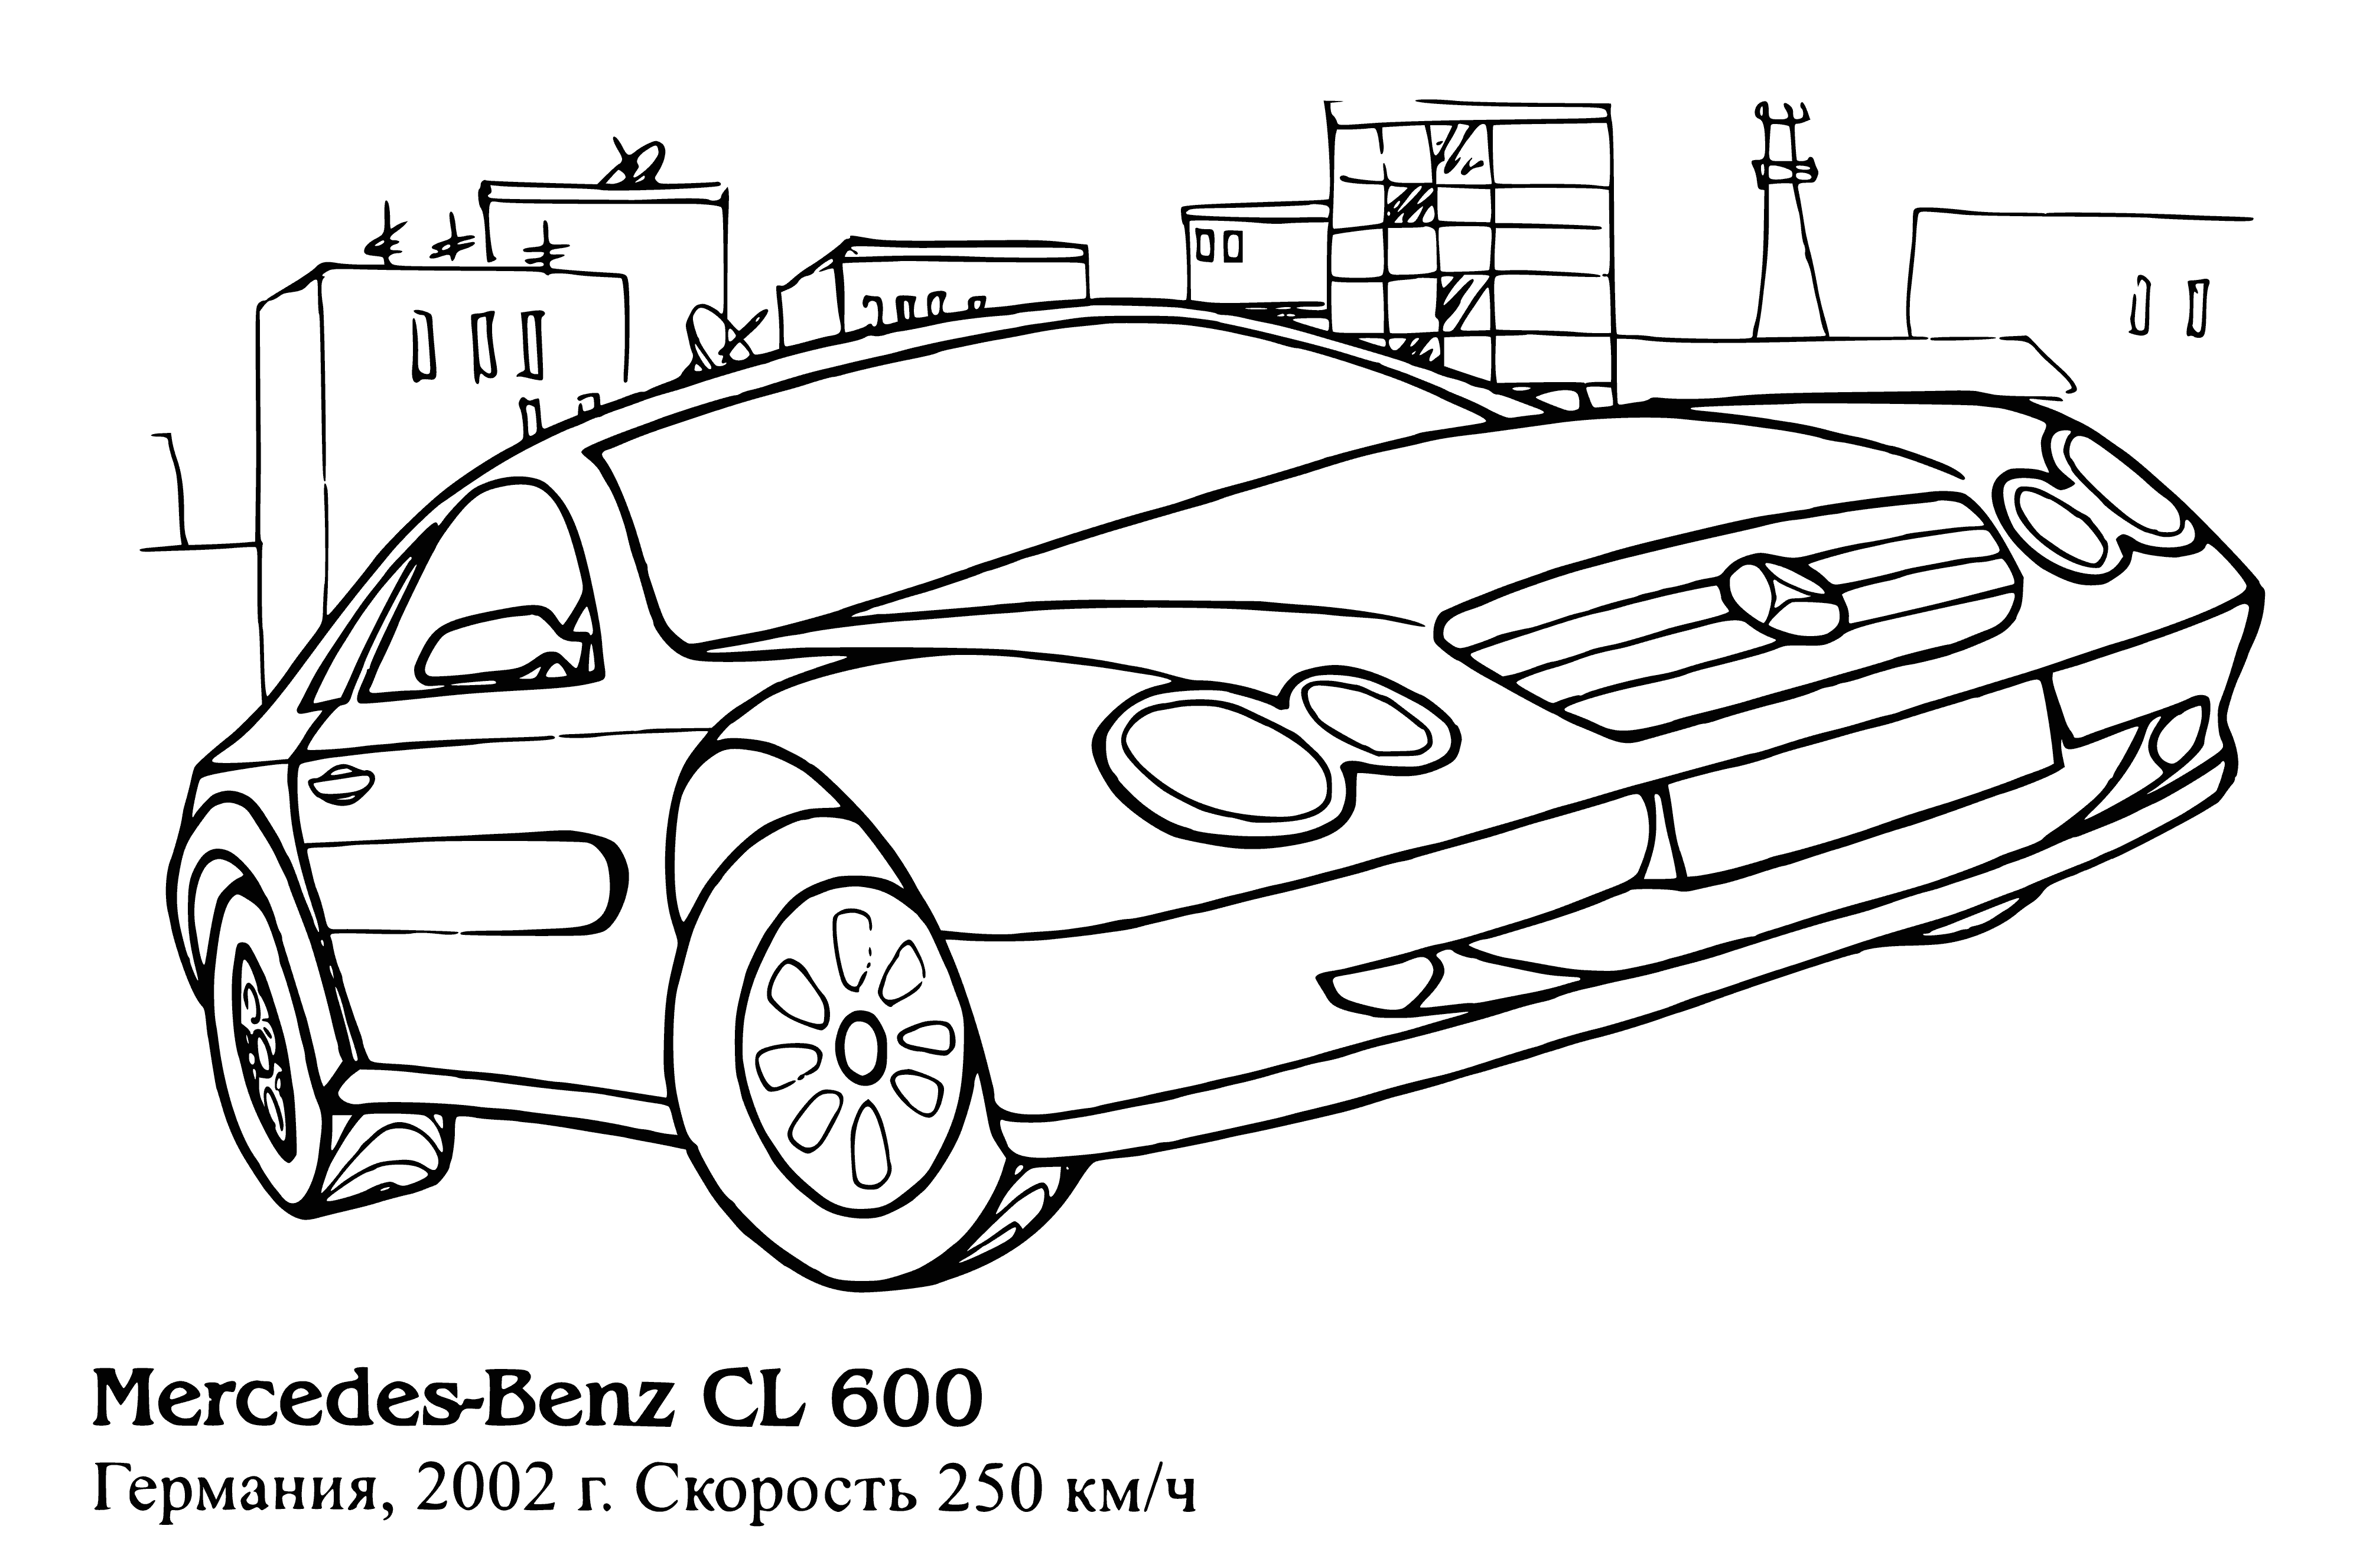 coloring page: Luxurious Mercedes-Benz CL 600 with black exterior, chrome accents, sunroof, spoiler & Mercedes-Benz logo on front.